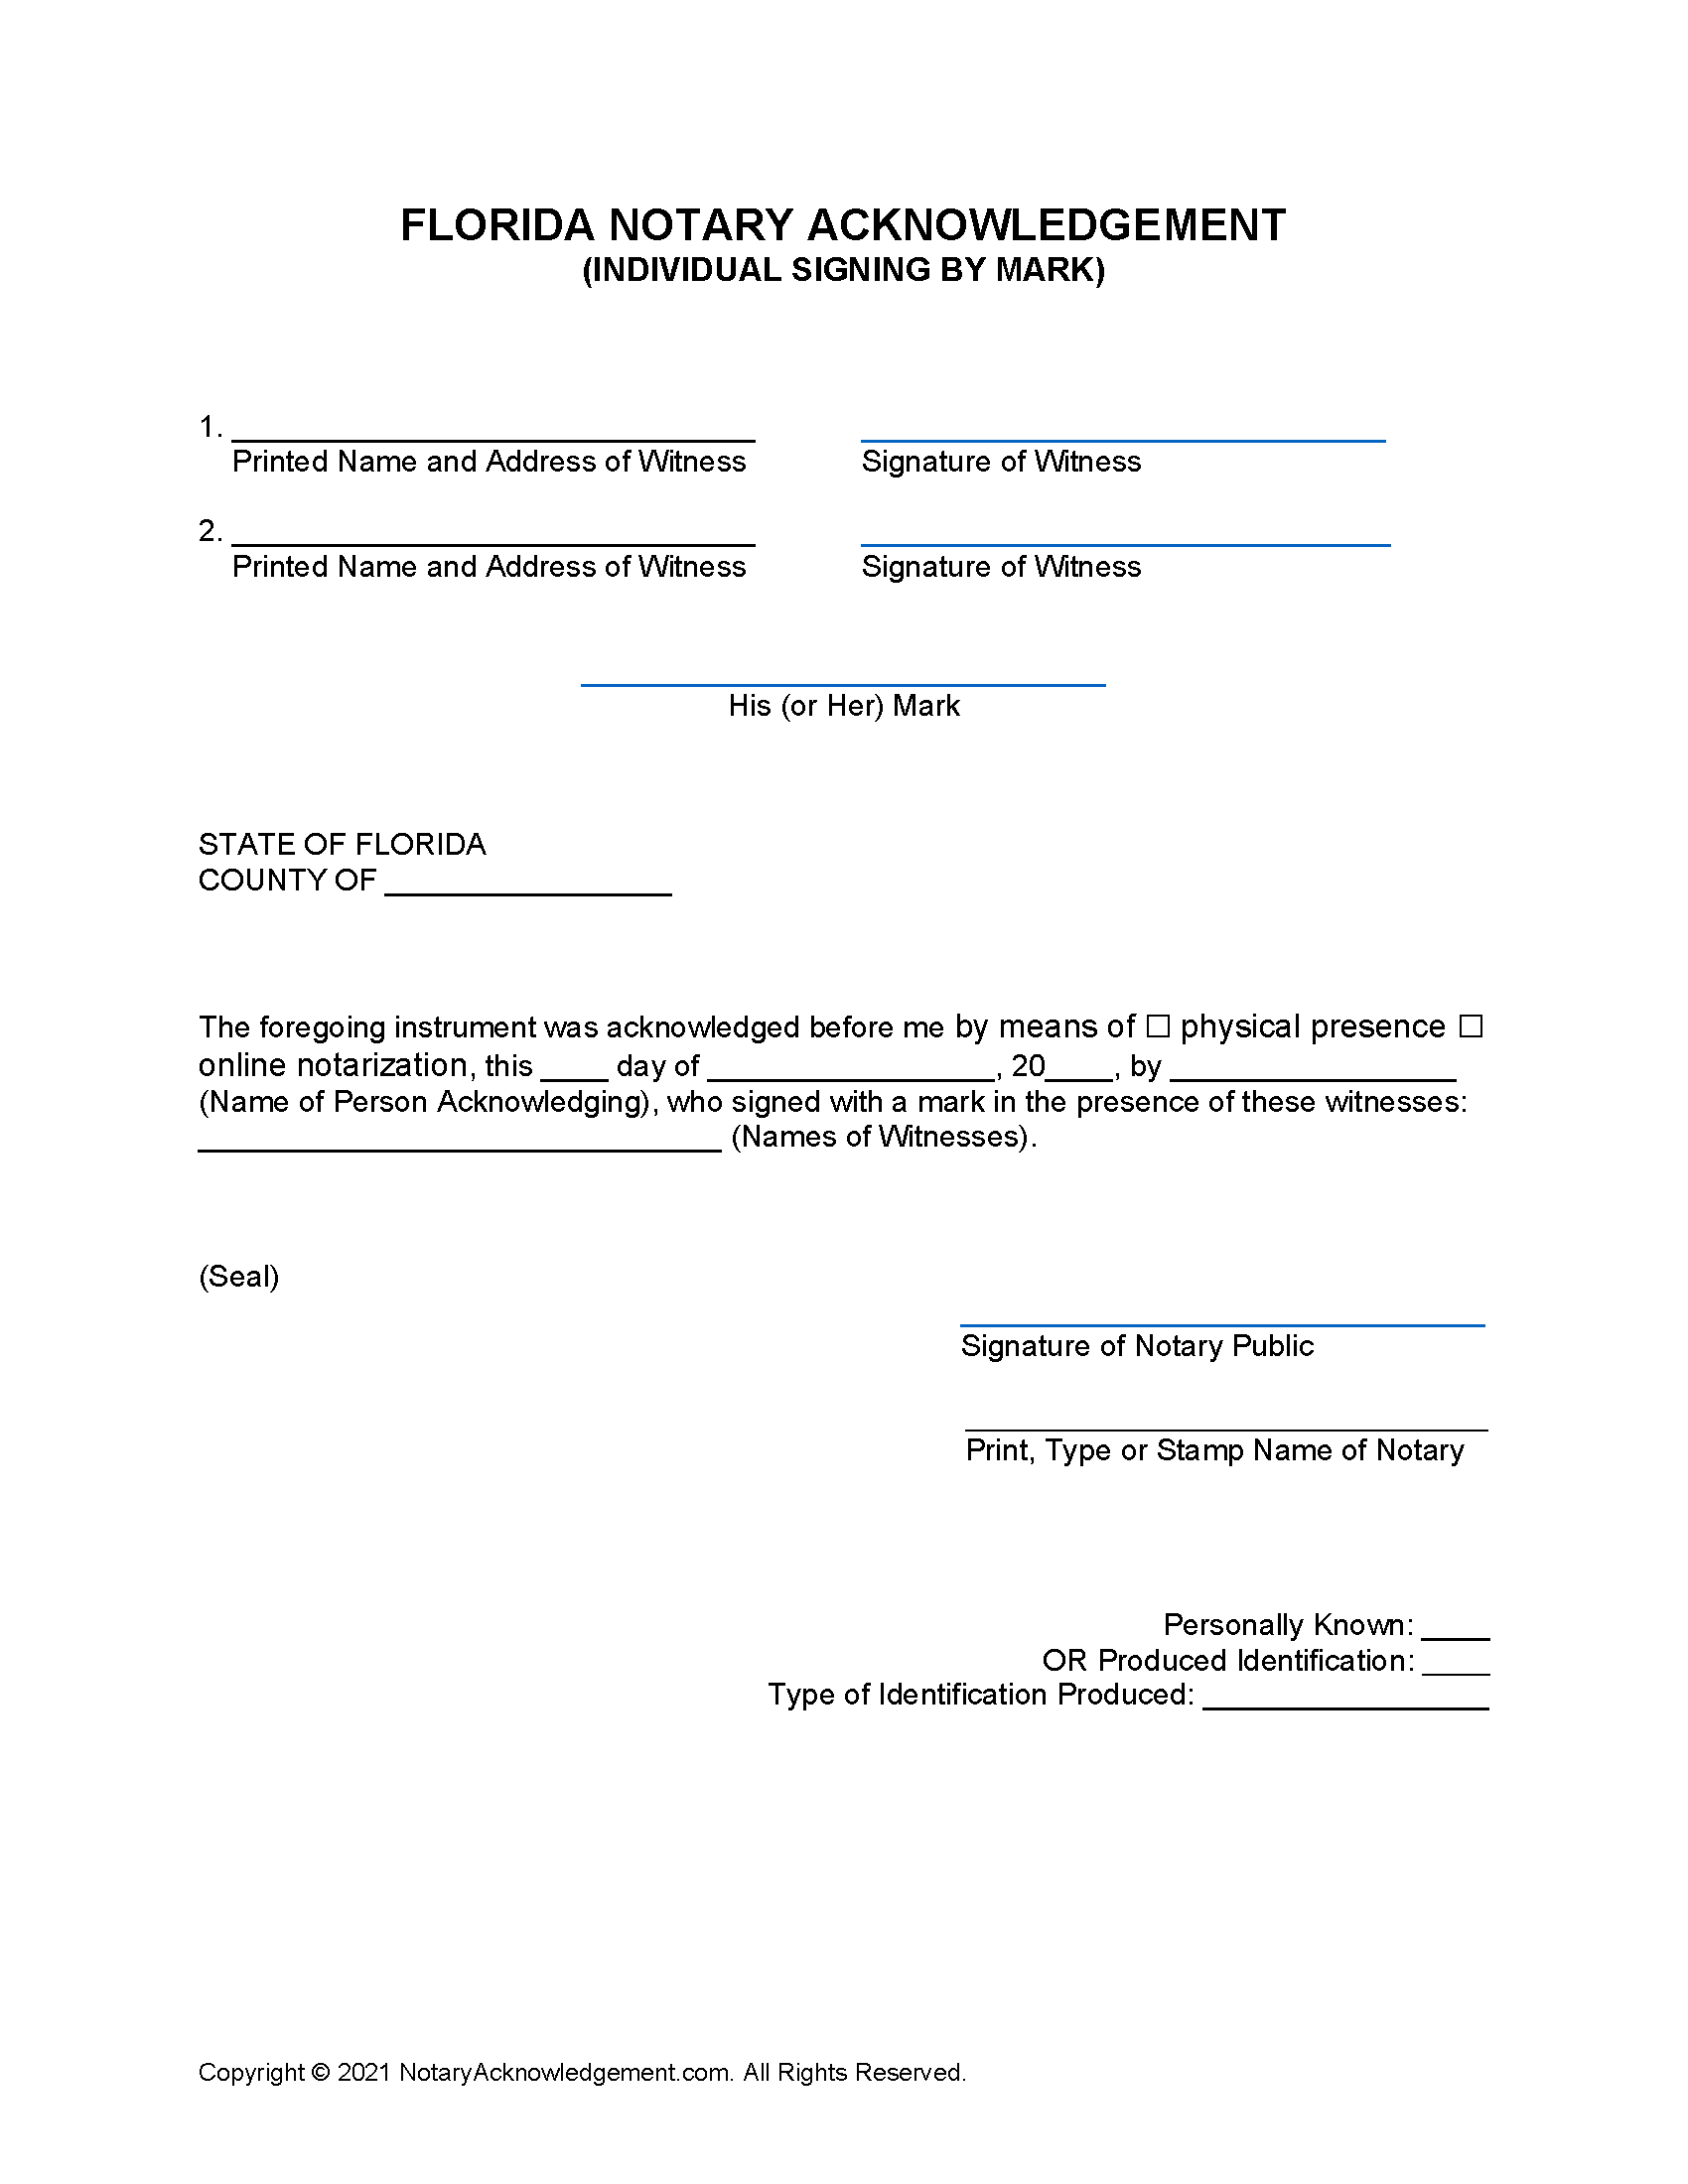 free-florida-notary-acknowledgement-individual-signing-by-mark-pdf